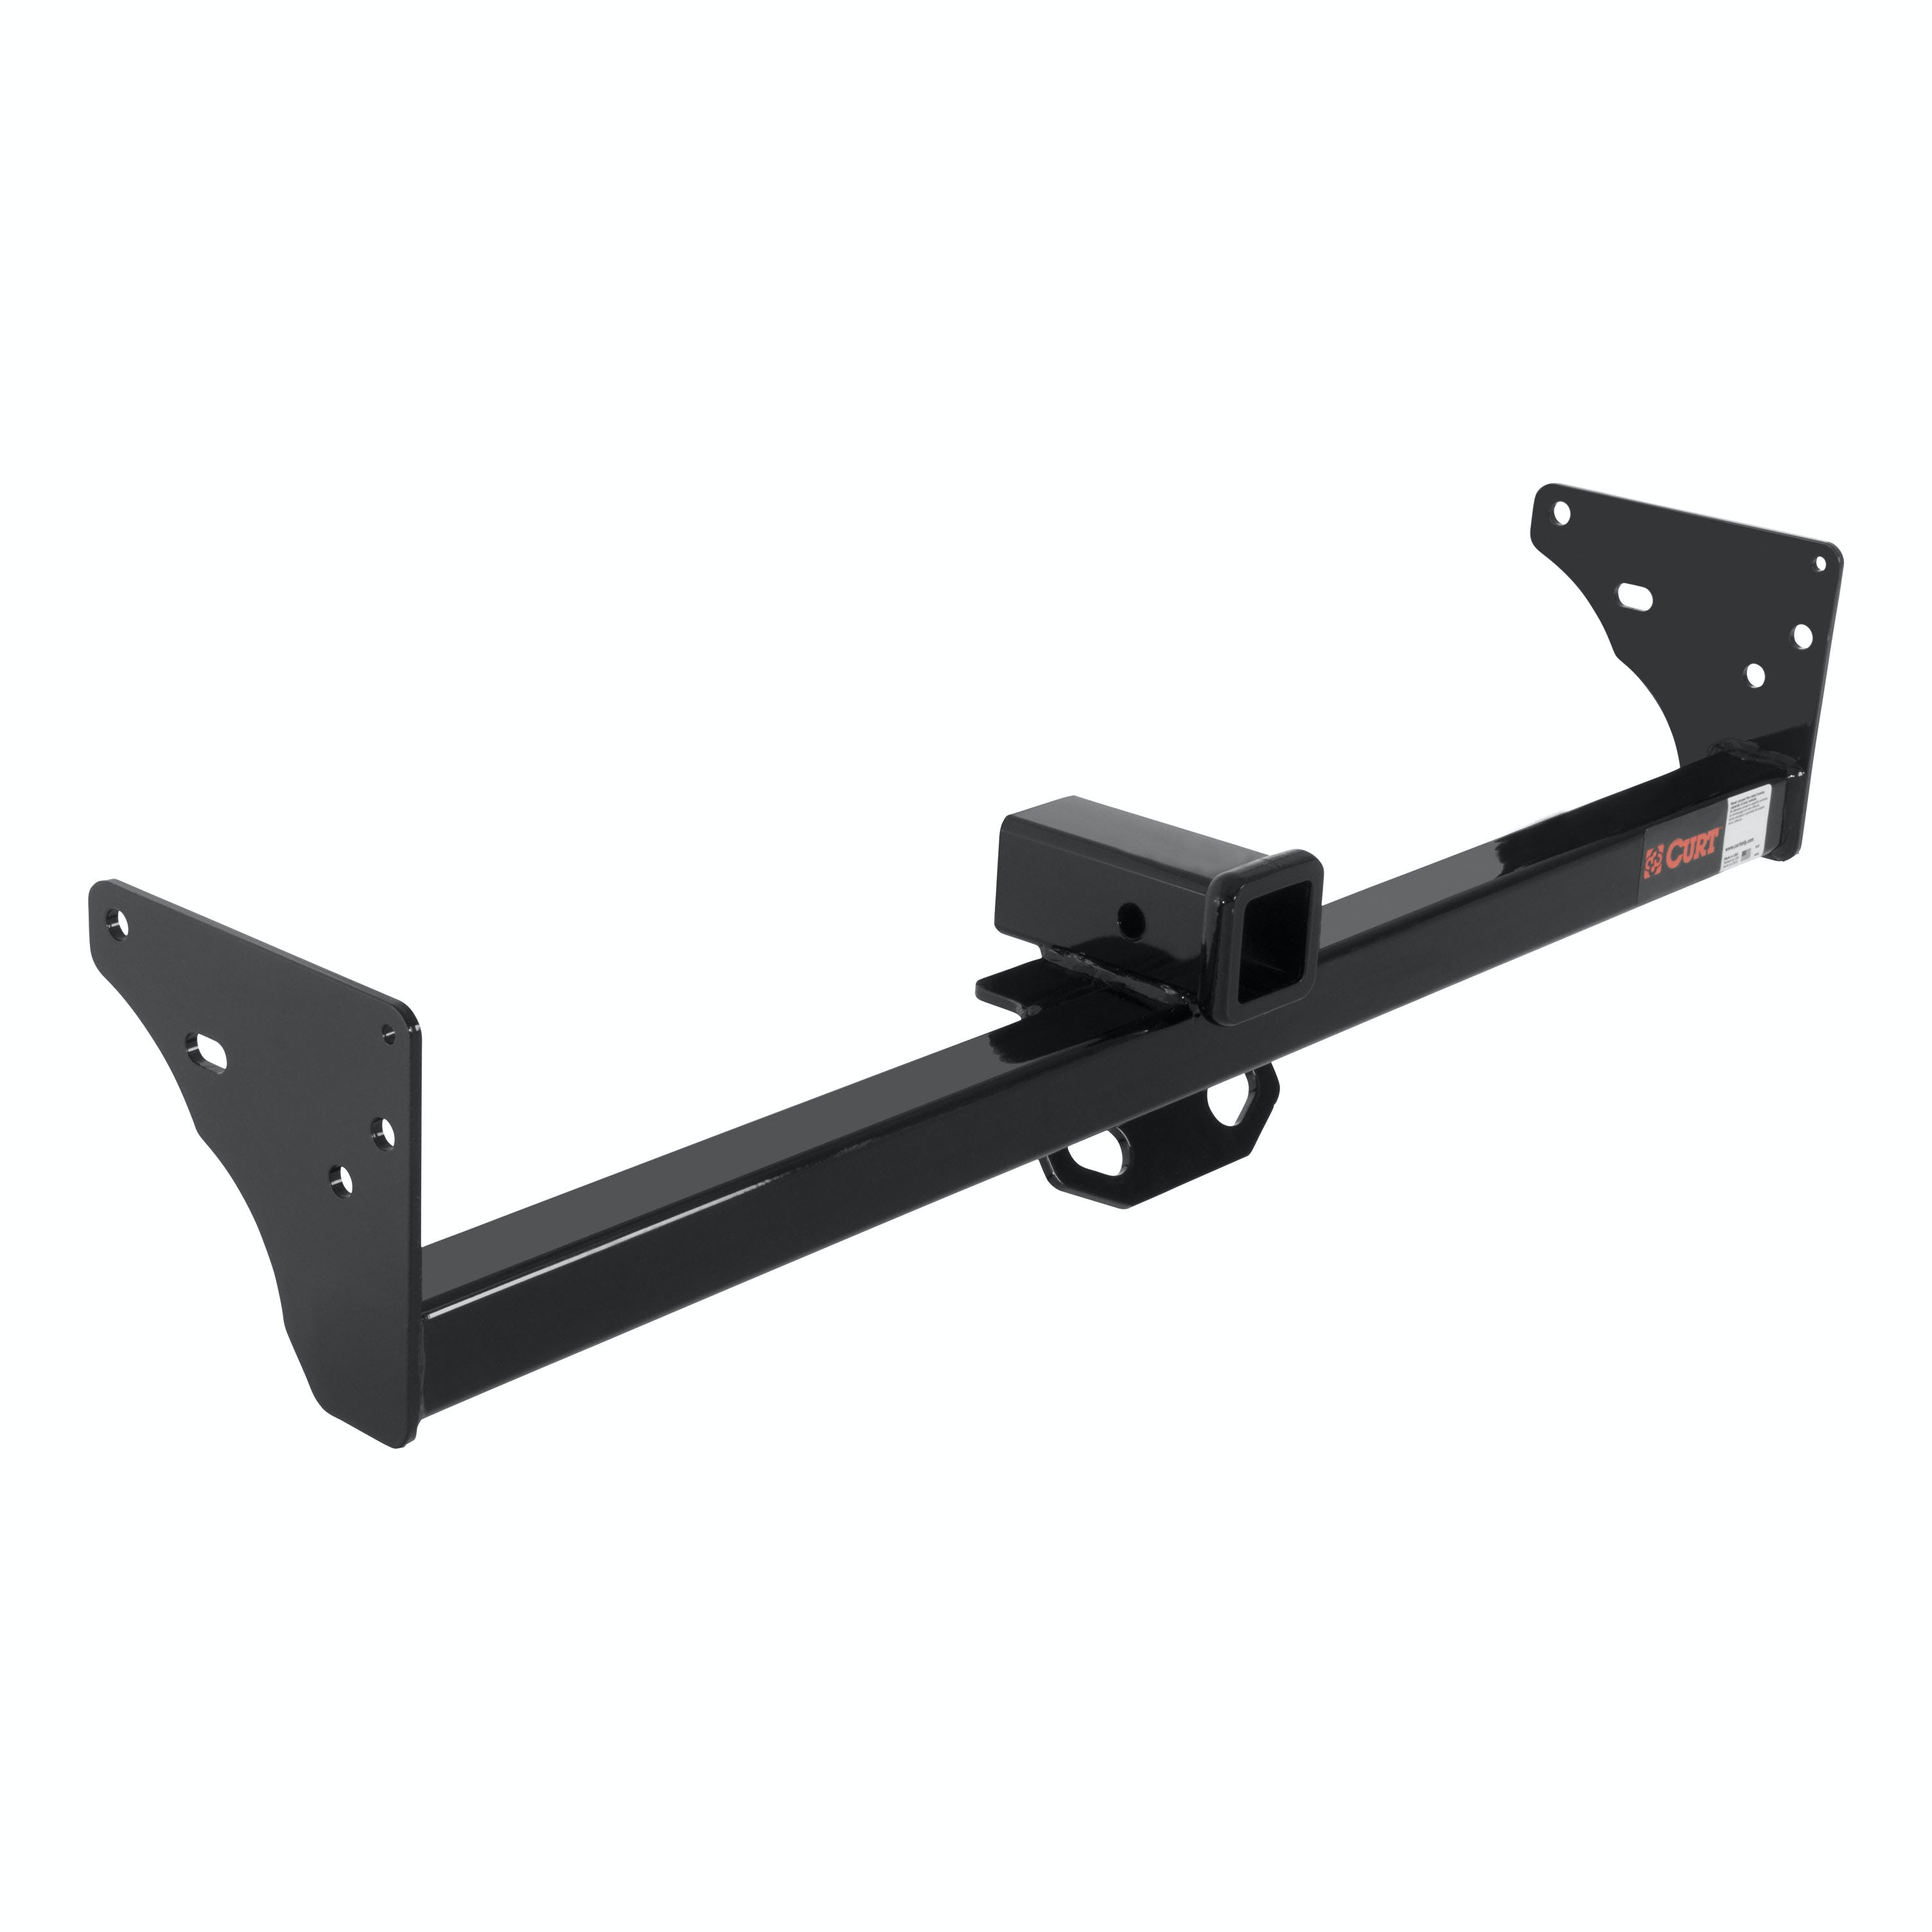 CURT 13920 Class 3 Trailer Hitch, 2 Receiver, Select Chevrolet S10, GMC S15, Sonoma